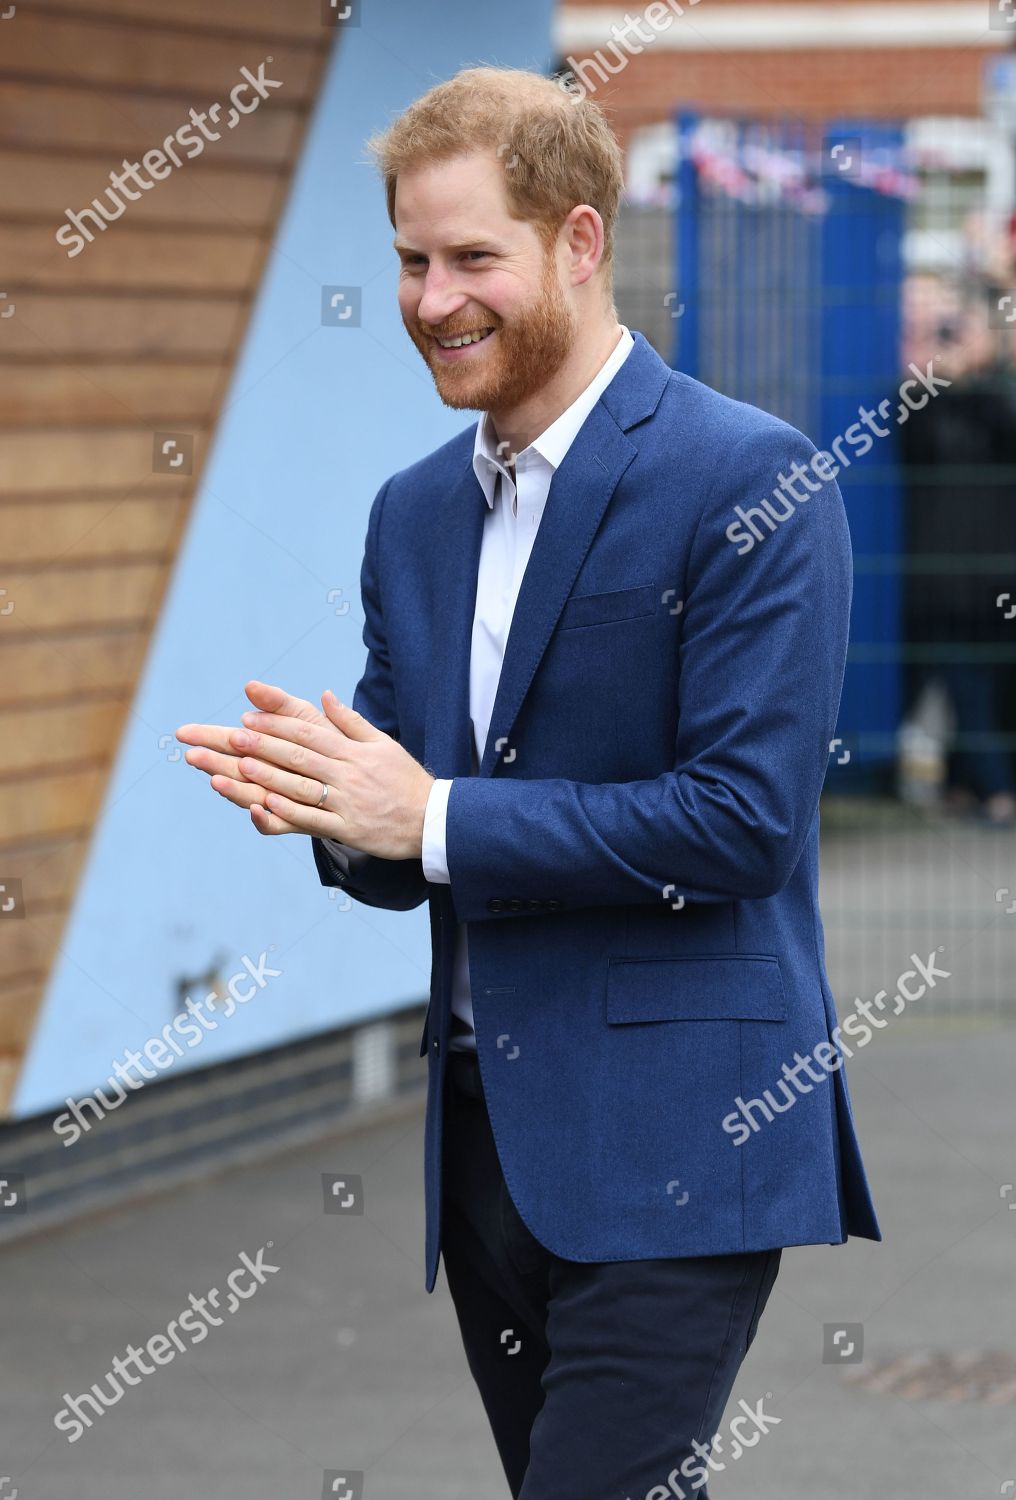 prince-harry-visits-st-vincents-catholic-primary-school-for-commonwealth-canopy-and-woodland-trust-tree-planting-ceremony-london-uk-shutterstock-editorial-10160984h.jpg